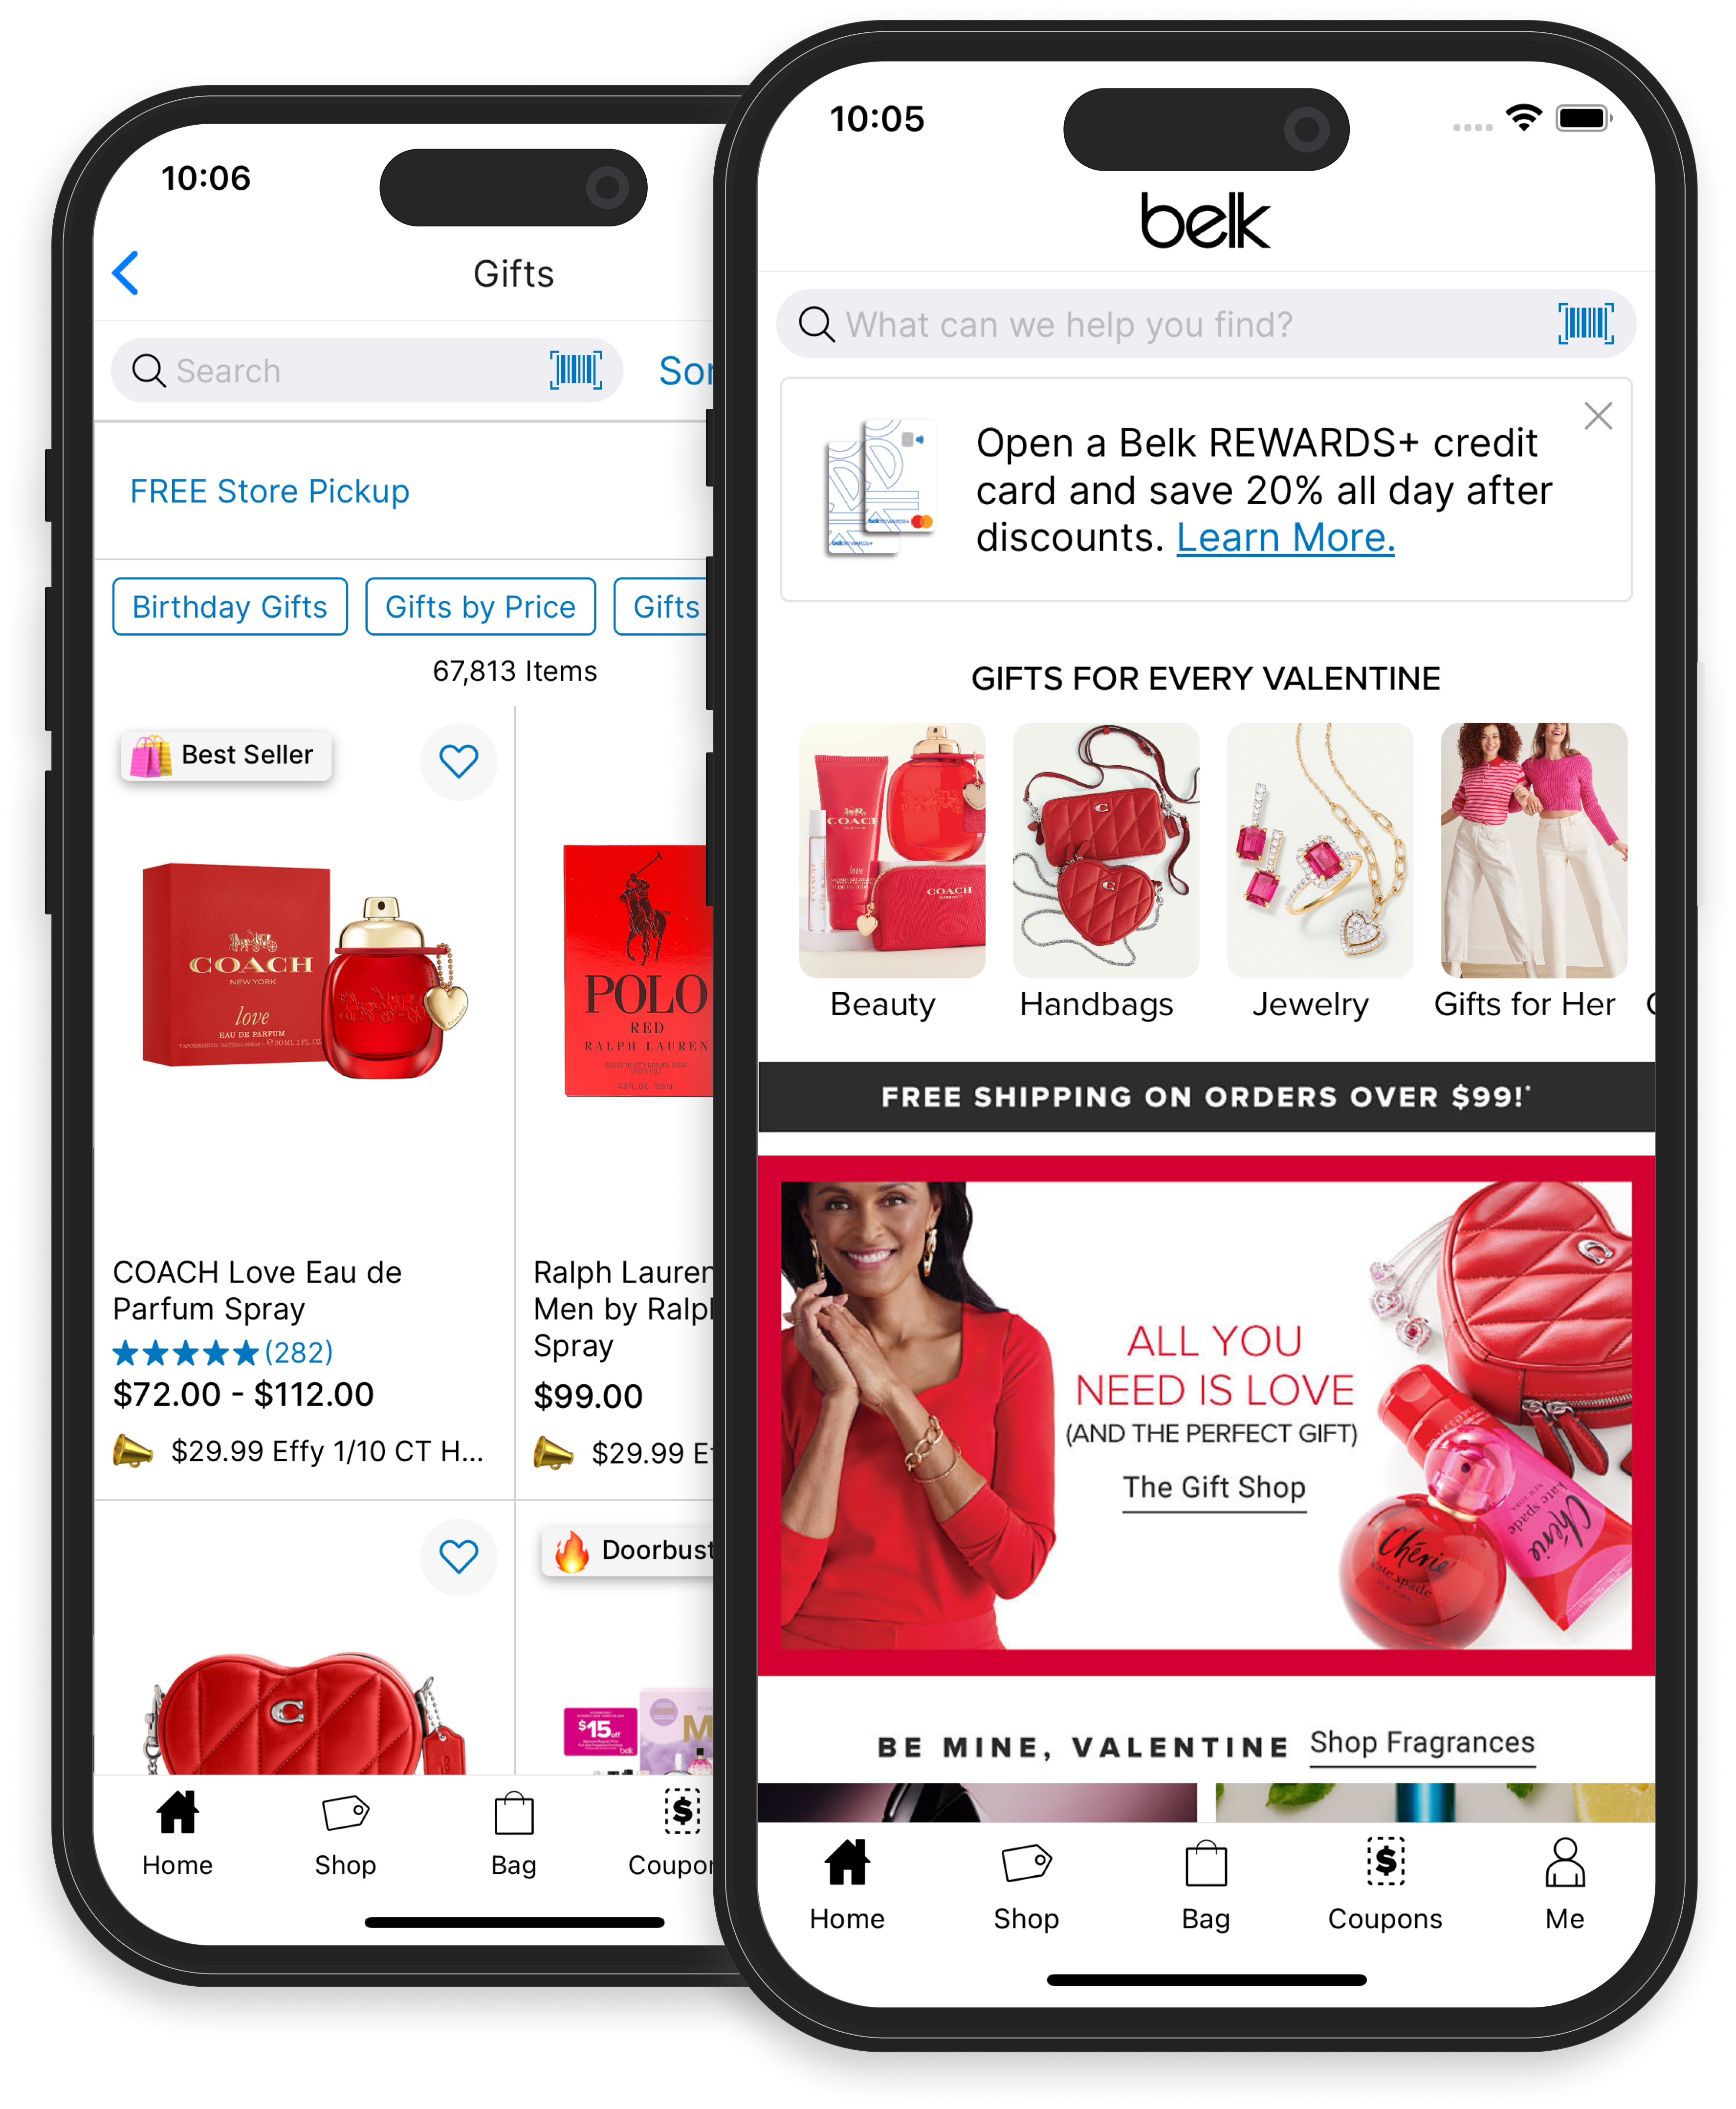 The image shows two smartphones side by side, each displaying different sections of a retail app. The left phone highlights a 'Gifts' category, featuring images and prices of popular fragrances like COACH and Polo, with navigation icons for home, shop, bag, coupons, and more at the bottom. The right phone shows the homepage of the 'belk' app with various Valentine's Day gift suggestions, an advertisement for a rewards credit card, and free shipping for orders over $99, along with a similar bottom navigation menu.